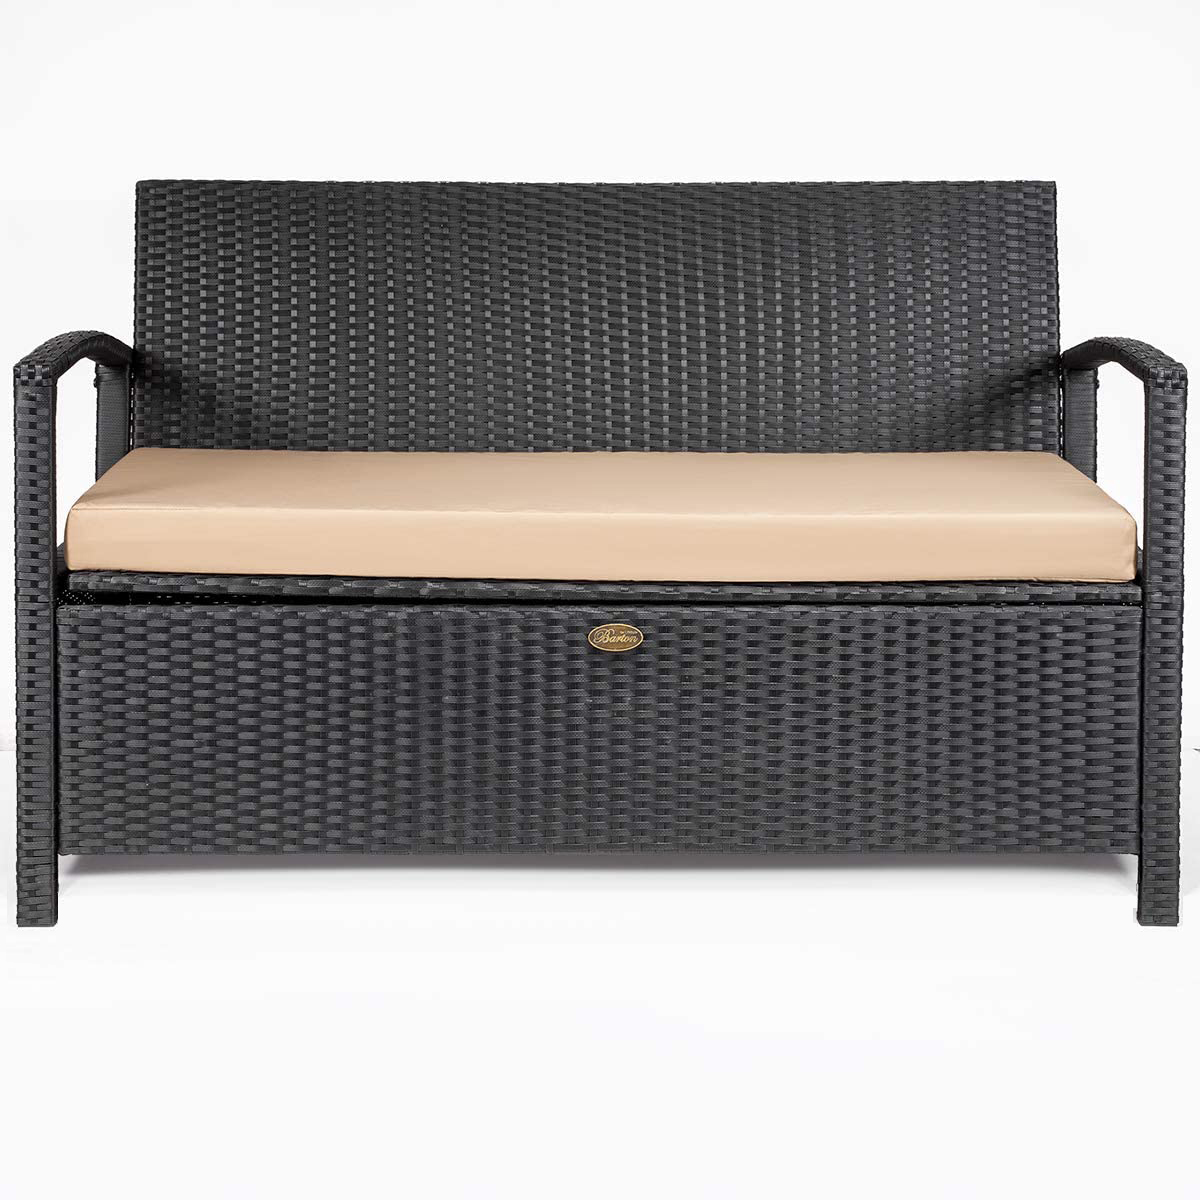 Barton Outdoor All-Weather Storage Bench Thick Seat Cushion w/ Backrest Patio Deck Box Wicker - image 2 of 7